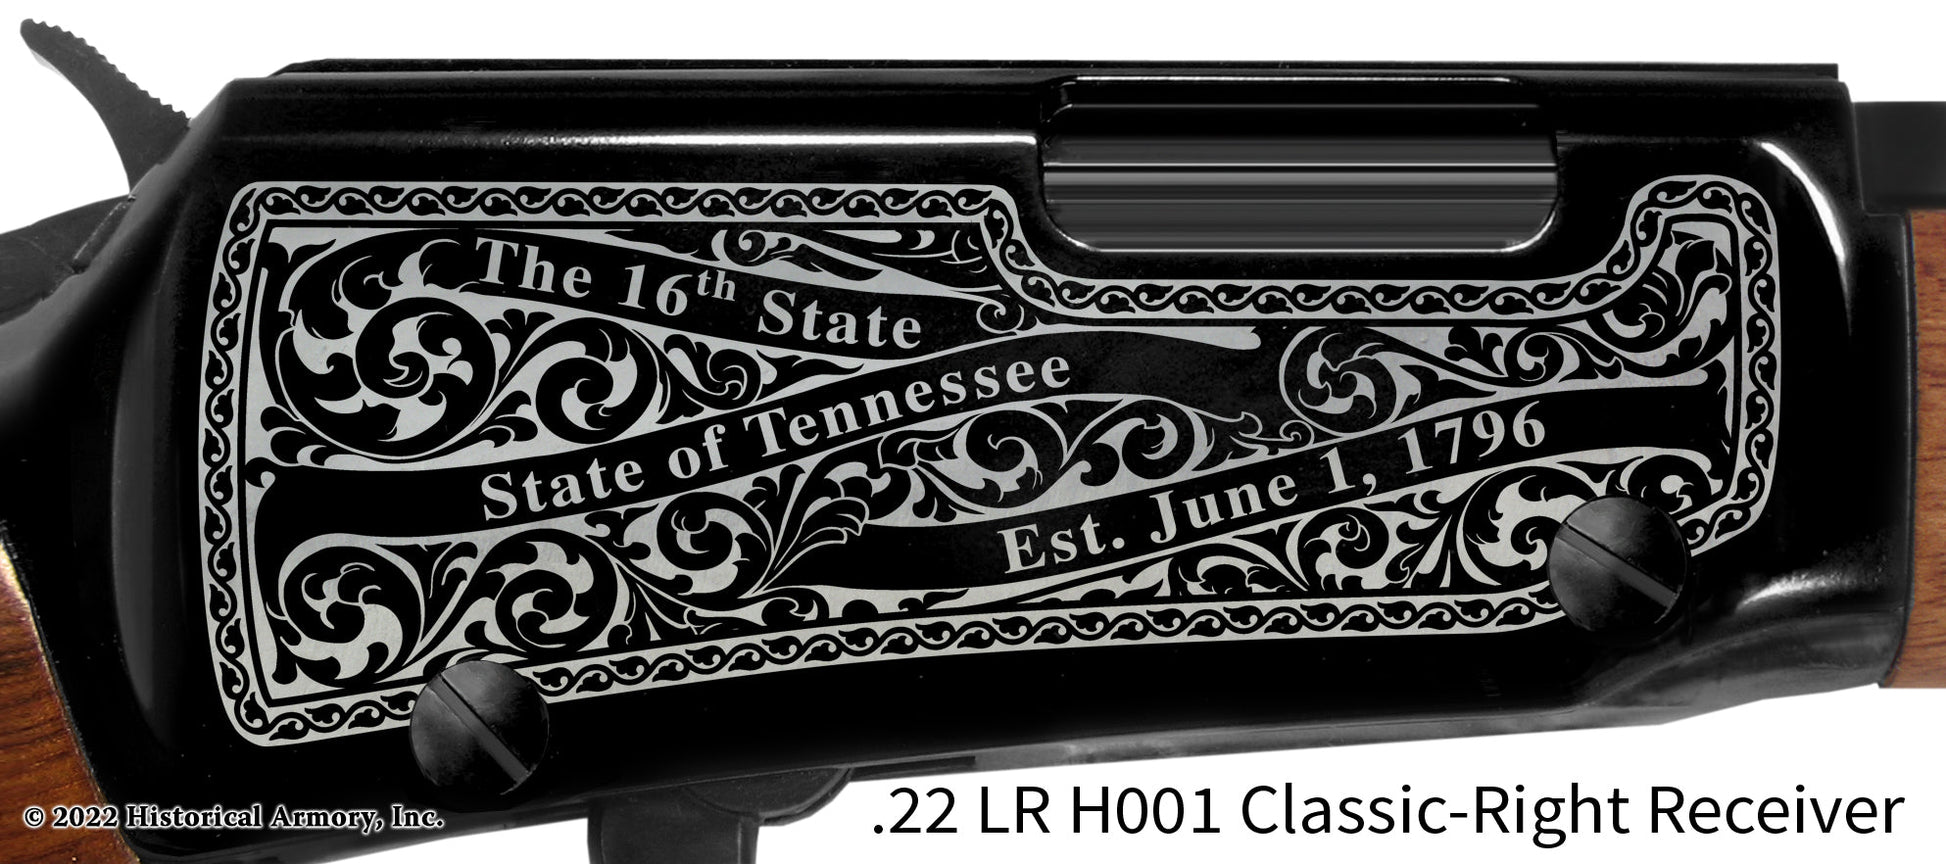 Crockett County Tennessee Engraved Henry H001 Rifle